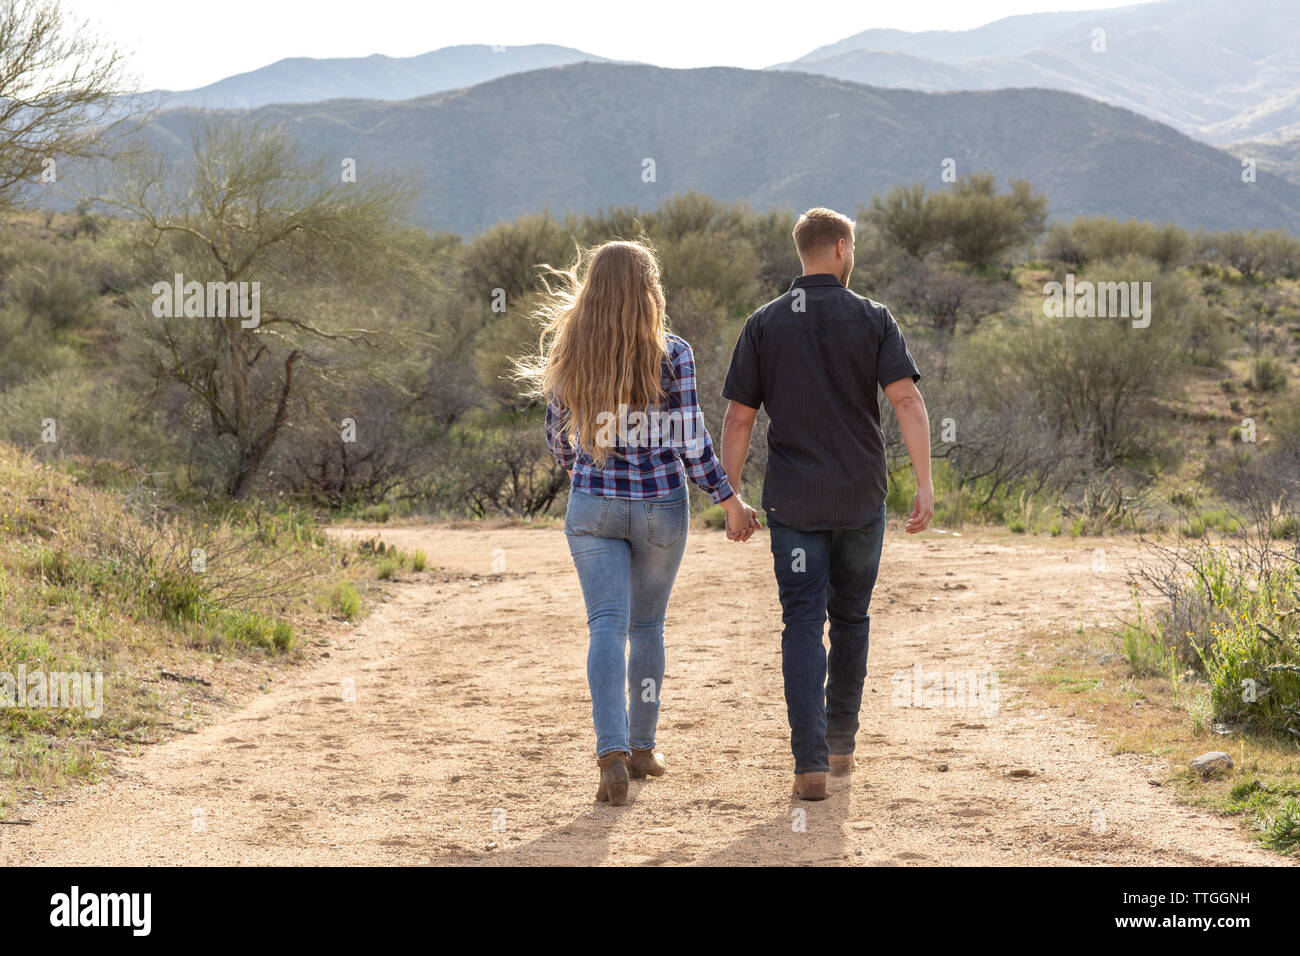 Western wear young couple holding hands and walking in desert Stock Photo